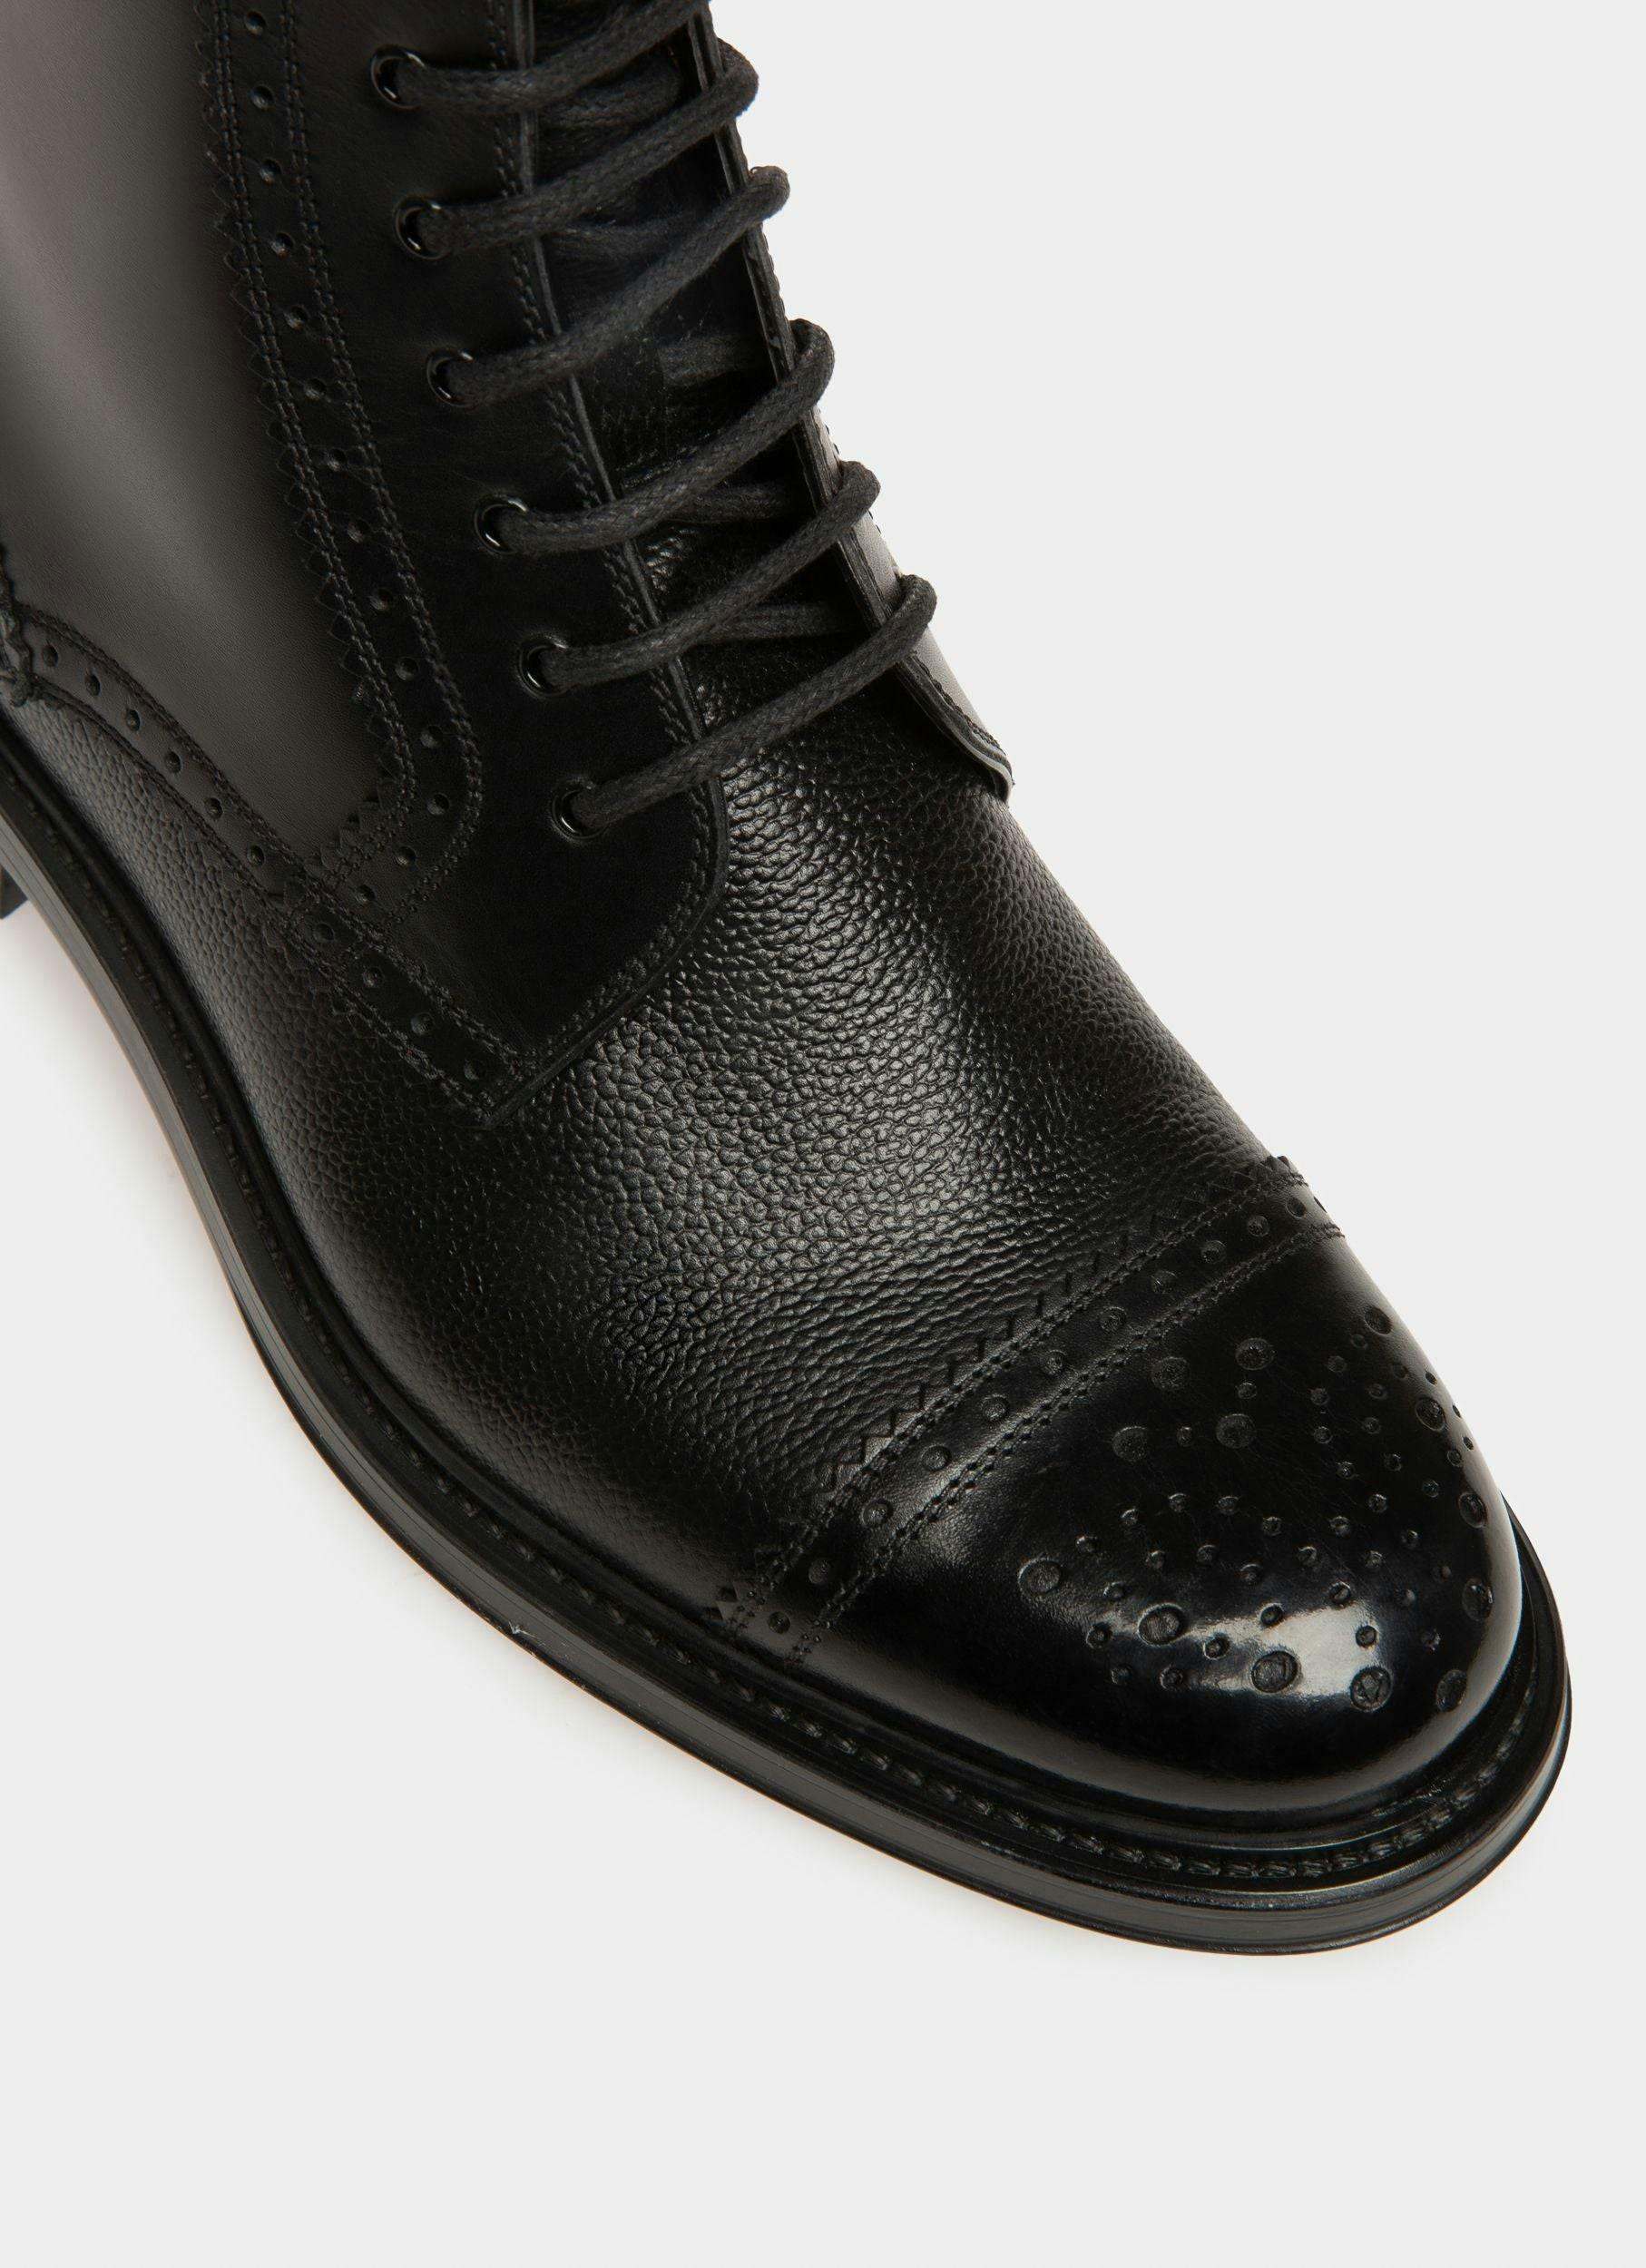 Nicoldon Leather Boots In Black - Men's - Bally - 06